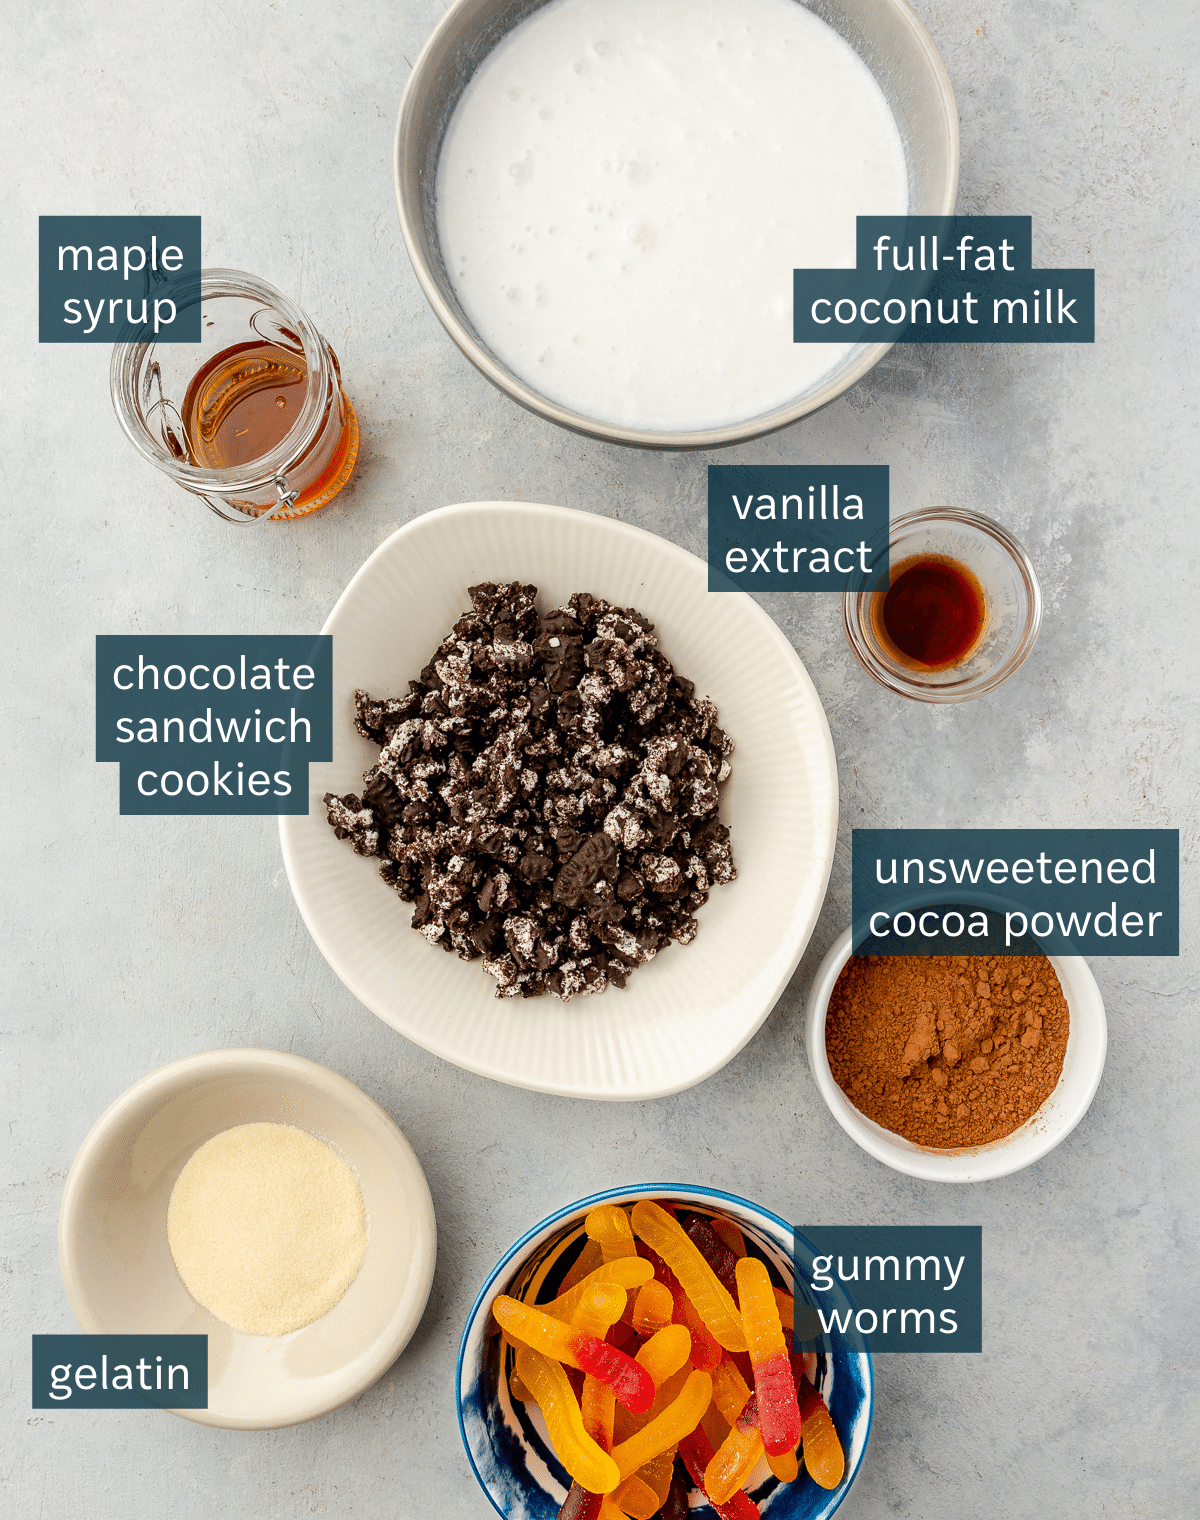 All of the ingredients needed to make dirt worm pudding in different sized vessels on a gray surface.